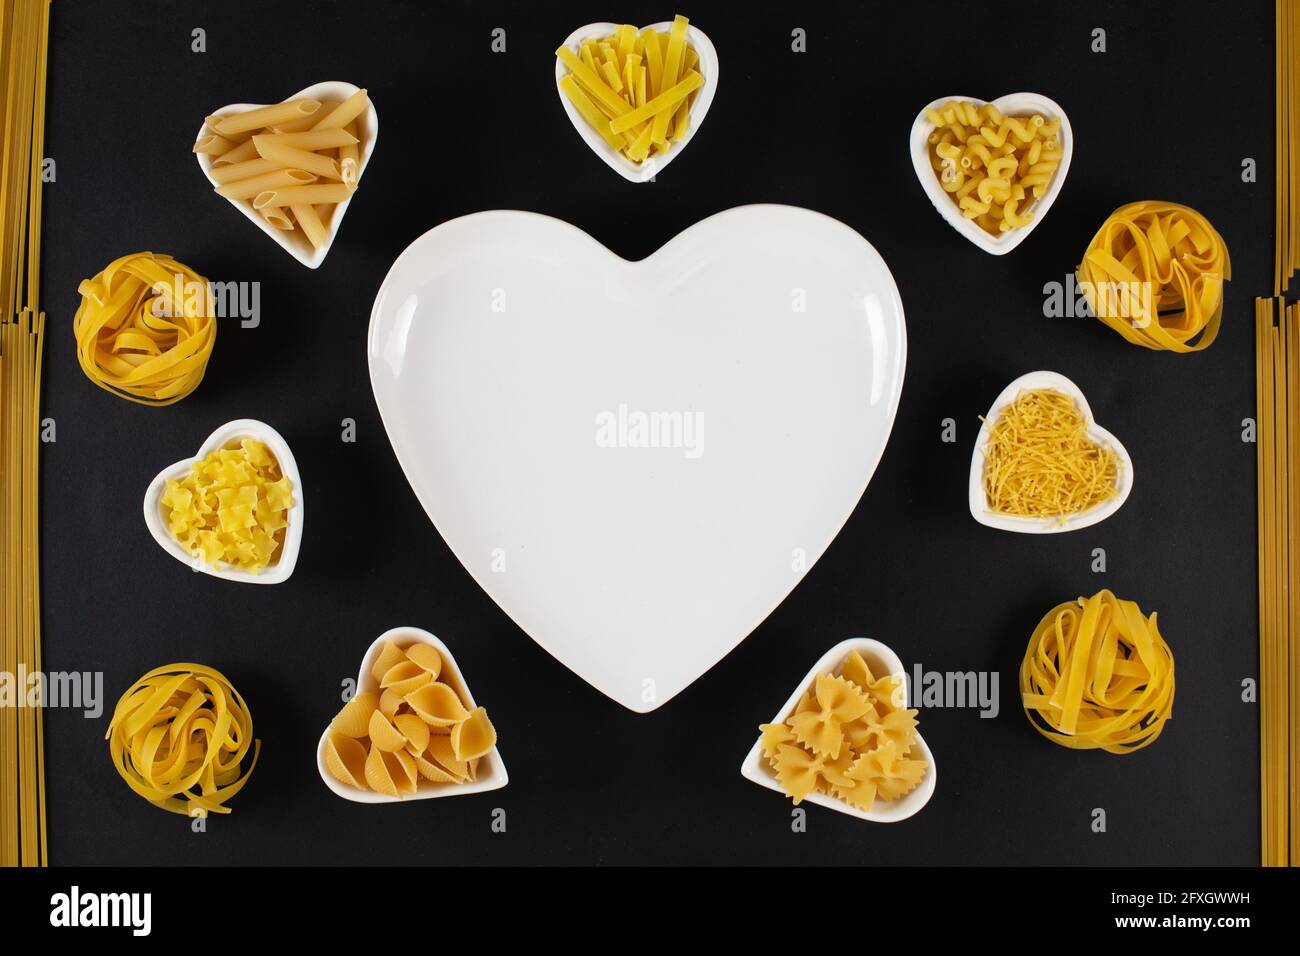 Pasta food selection around heart shaped porcelain dishes over black background. Uncooked, Dried pasta noodles. Love pasta concept Stock Photo